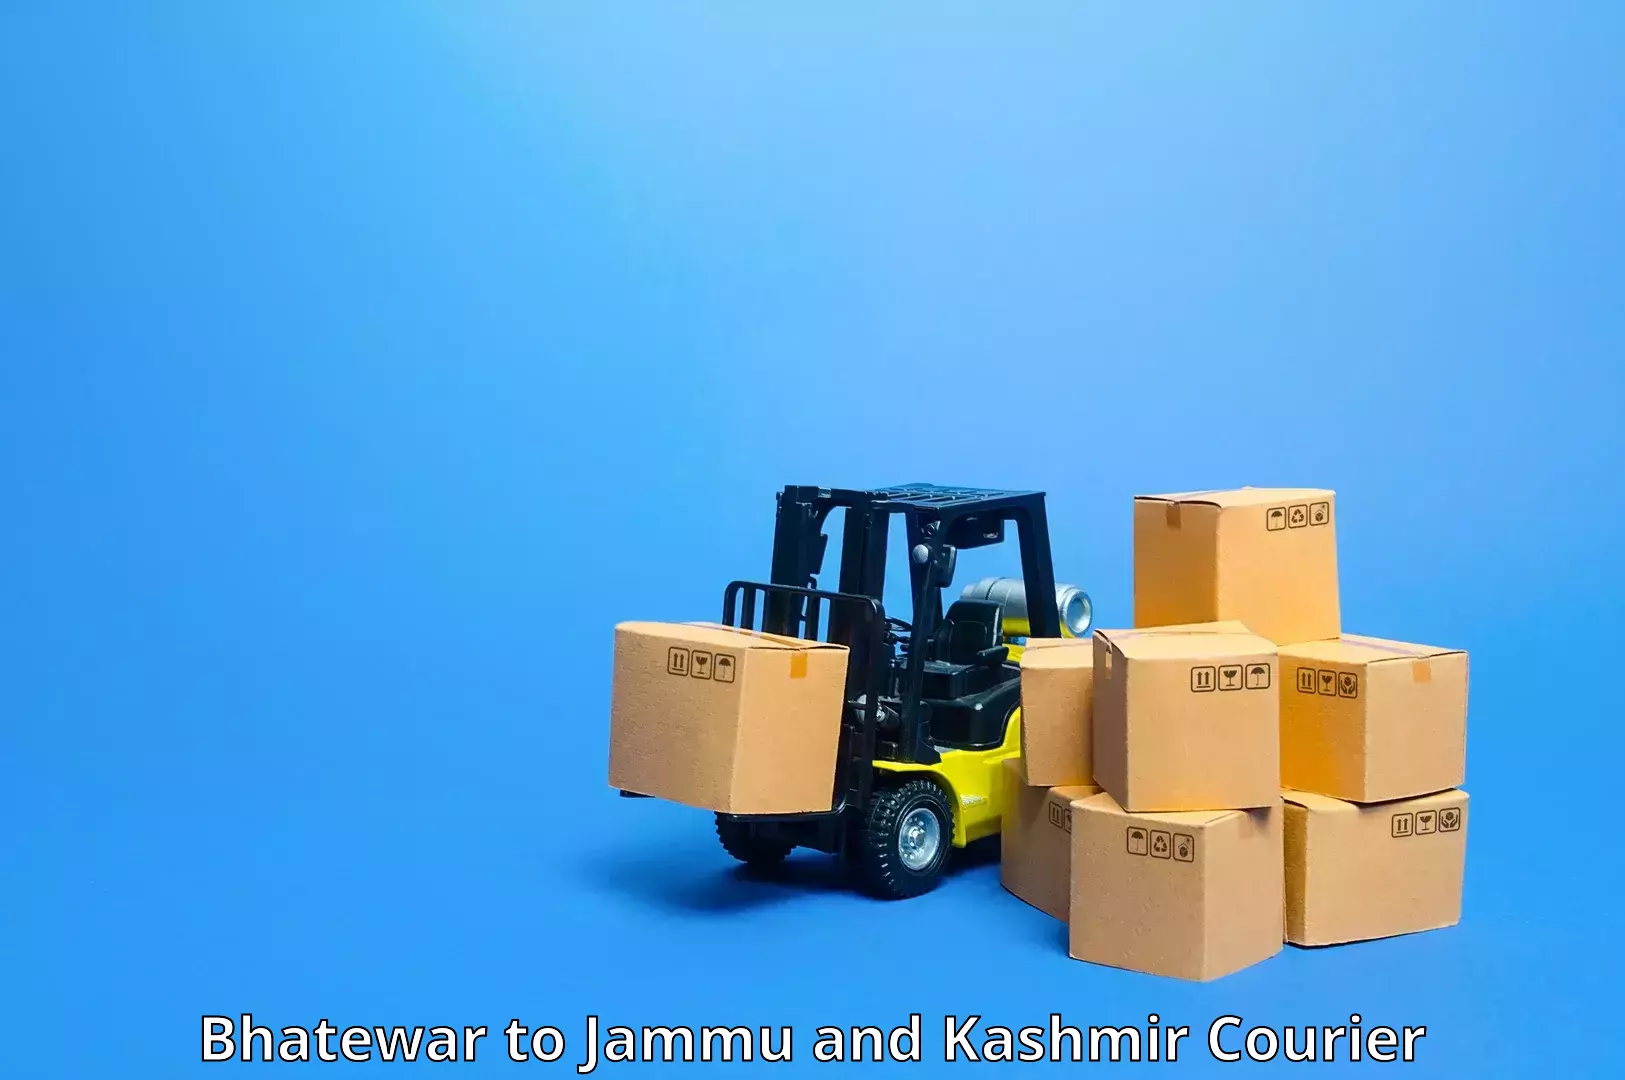 Express delivery capabilities in Bhatewar to Leh